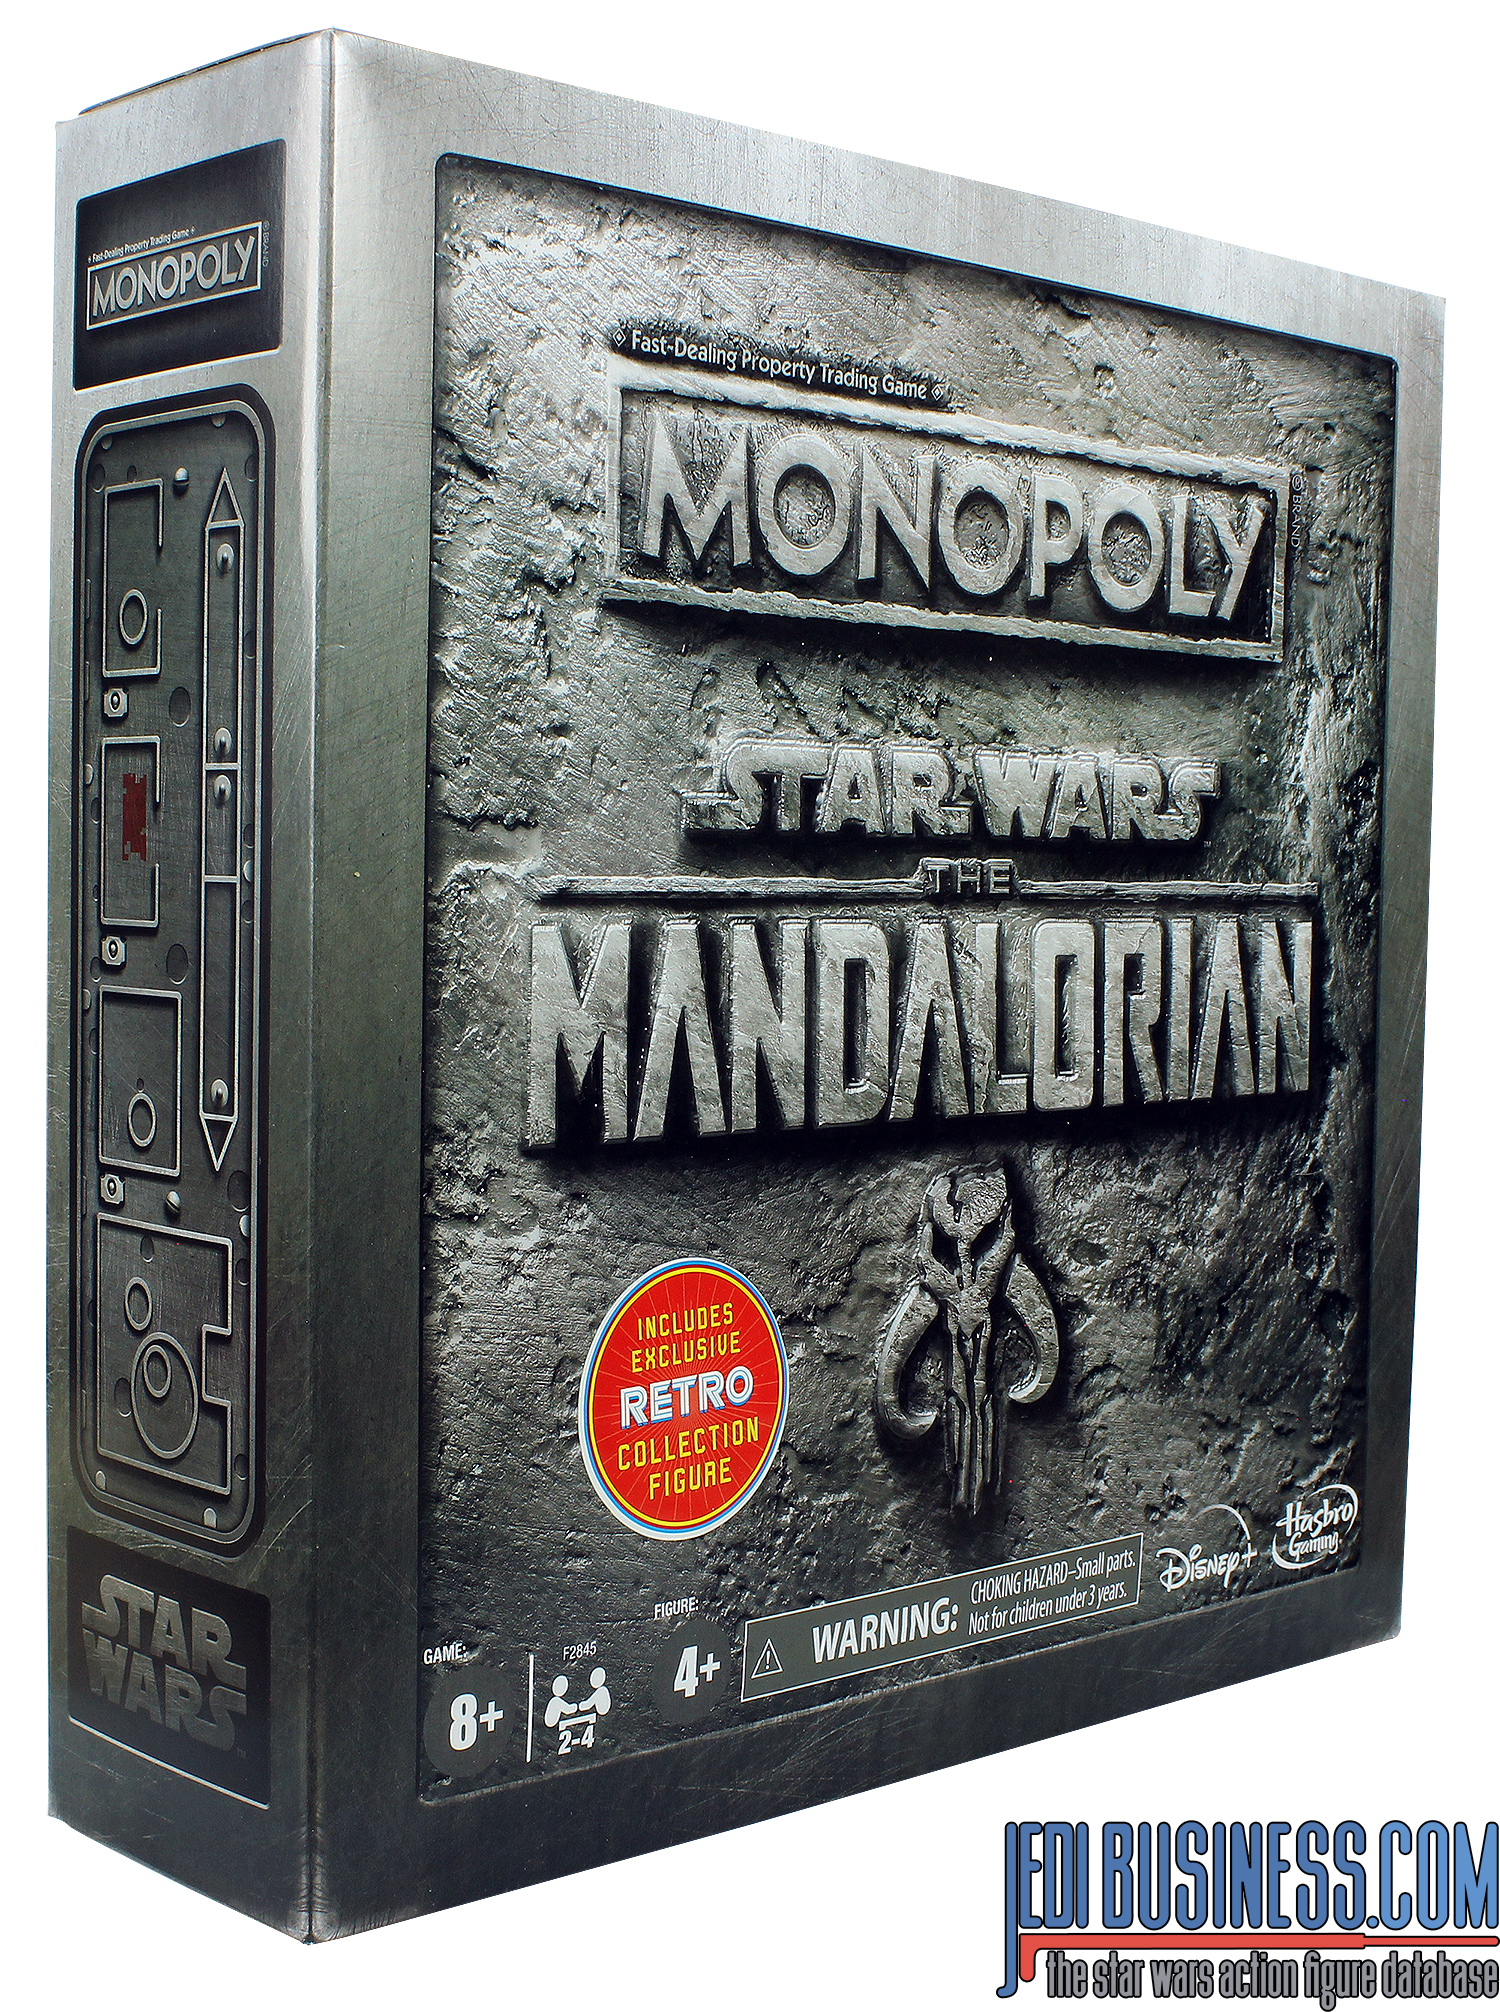 Stormtrooper With Mandalorian Monopoly Boardgame